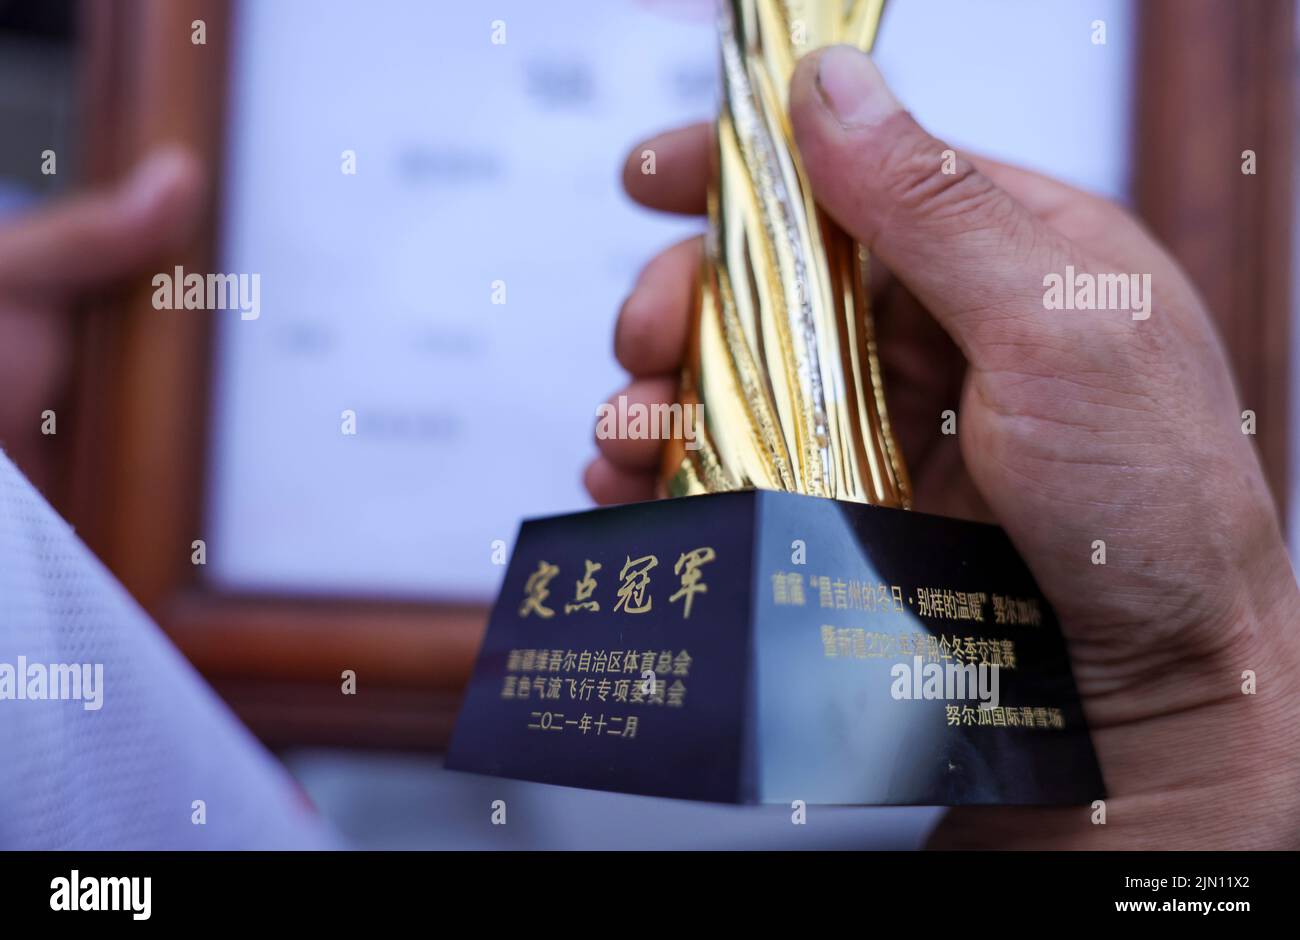 (220808) -- XINJIANG, Aug. 8, 2022 (Xinhua) -- Photo taken on June 14, 2022 shows a trophy for paragliding awarded for Chen Ruifeng. Born in Xinjiang, 52-year-old Chen Ruifeng is a paragliding amateur. He says he feels like having his own wings when the paraglider opens. In 2016, Chen Ruifeng started to practice paragliding. Later on, he joined a local club and received his flying certificate after training. As an outdoor enthusiast, he also engages himself in trail running, mountaineering and ice climbing. In his opinions, the unique terrain of Xinjiang, such as mountains, steppes and rivers, Stock Photo